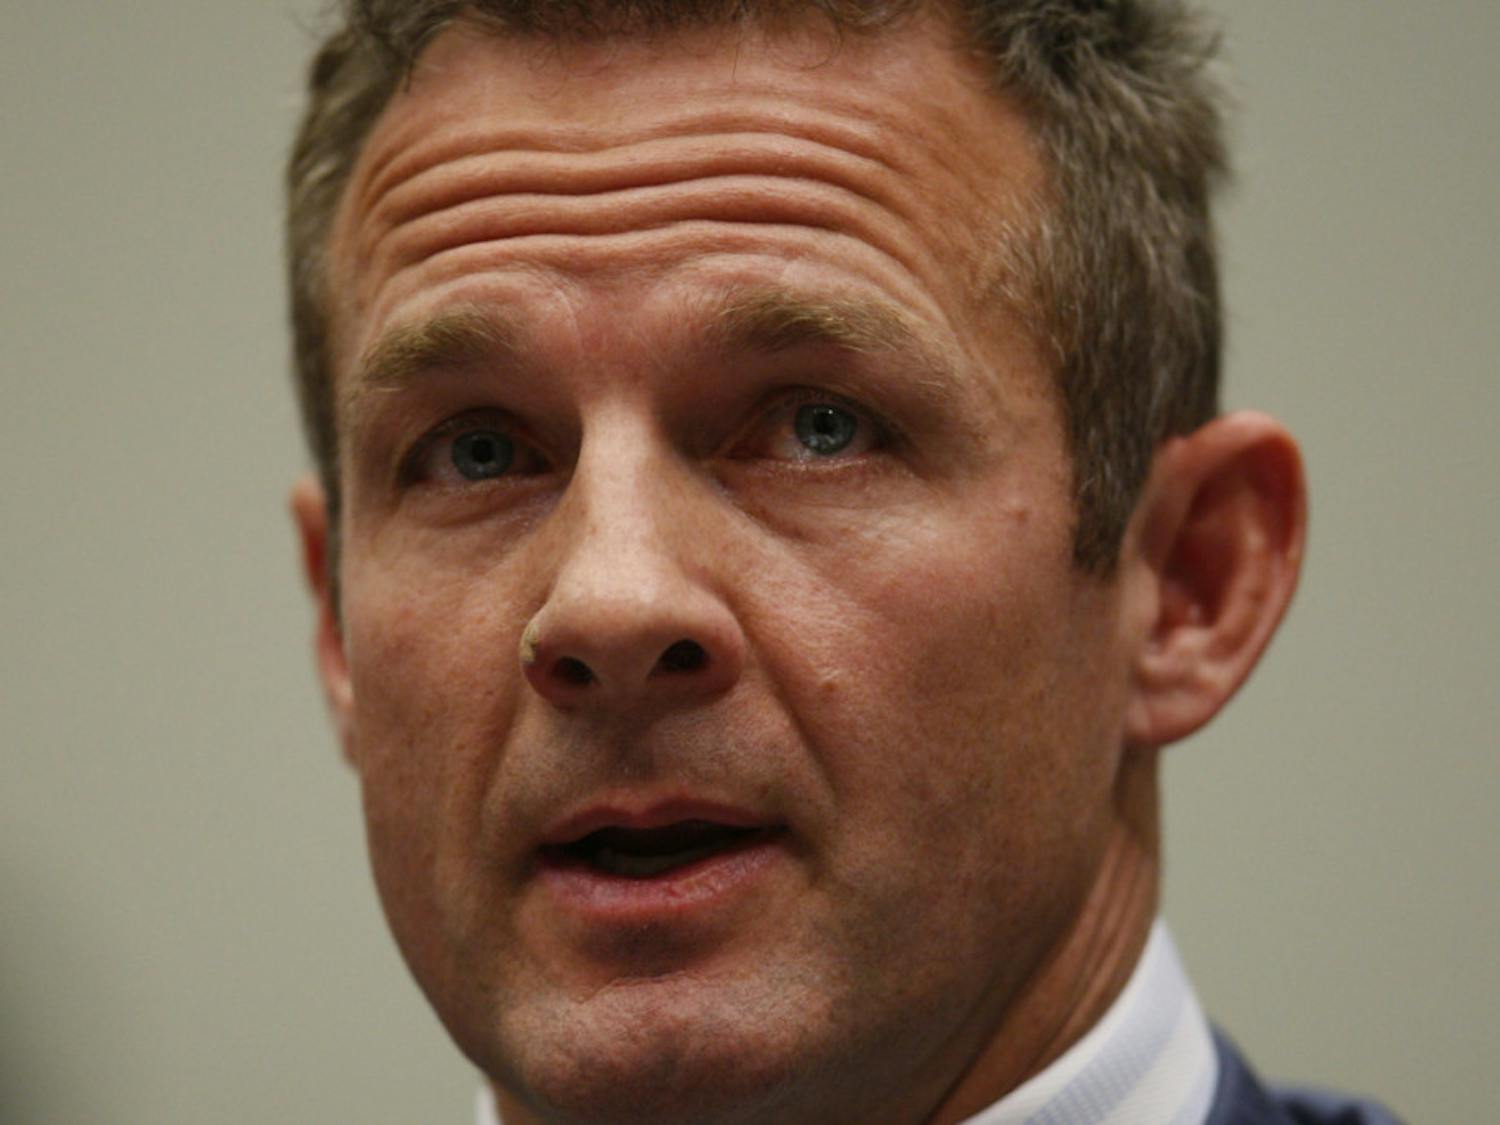 Former NFL player Merril Hoge (pictured) recently came out with a book he co-authored with Dr. Peter Cummings called “Brainwashed: The Bad Science Behind CTE and the Plot to Destroy Football.”